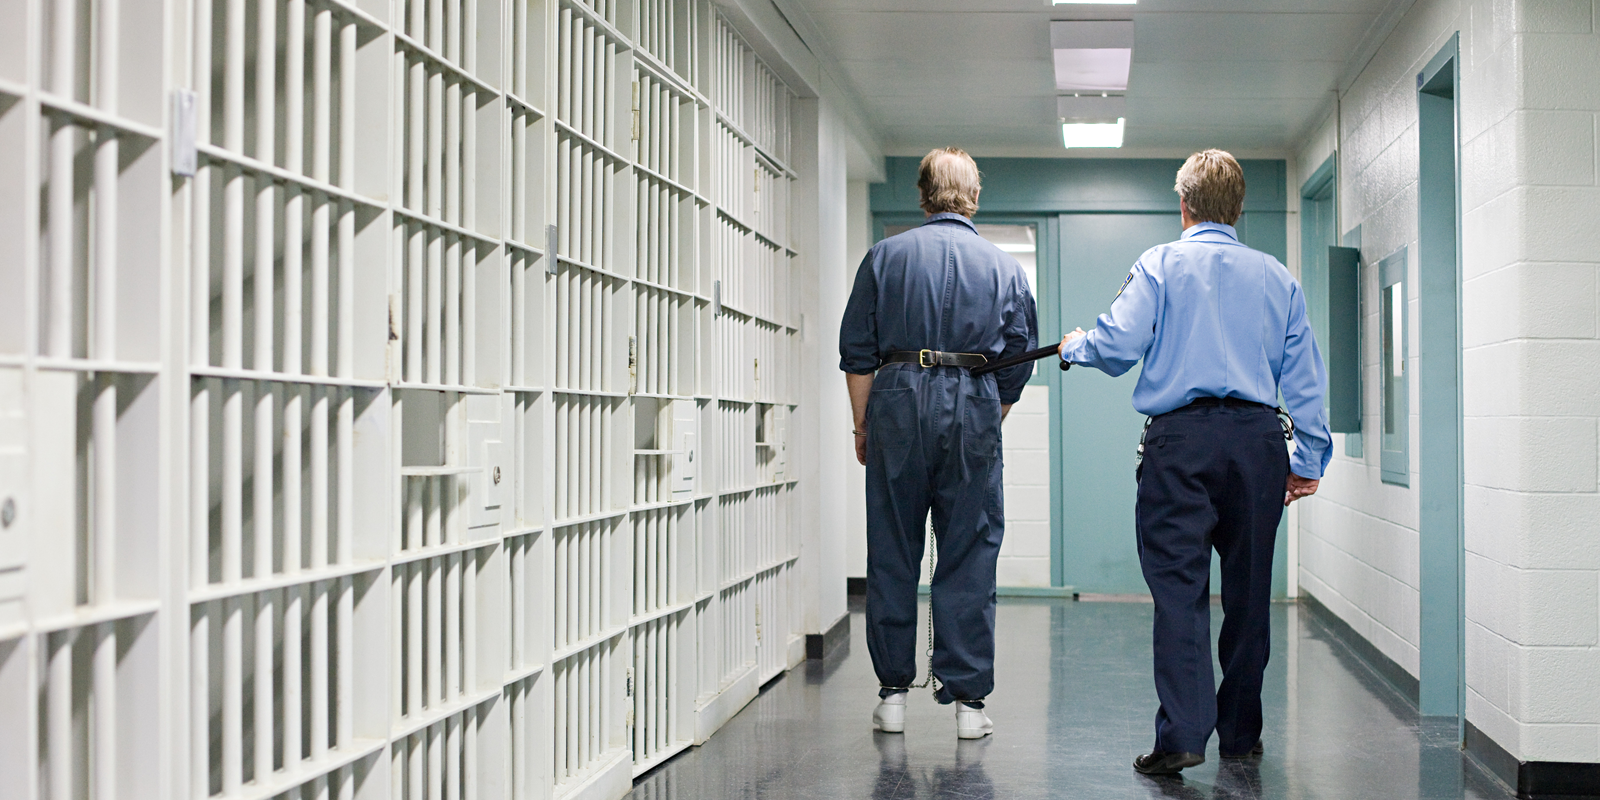 Stock image of a corrections officer escorting an inmate. Photo credit: Getty.